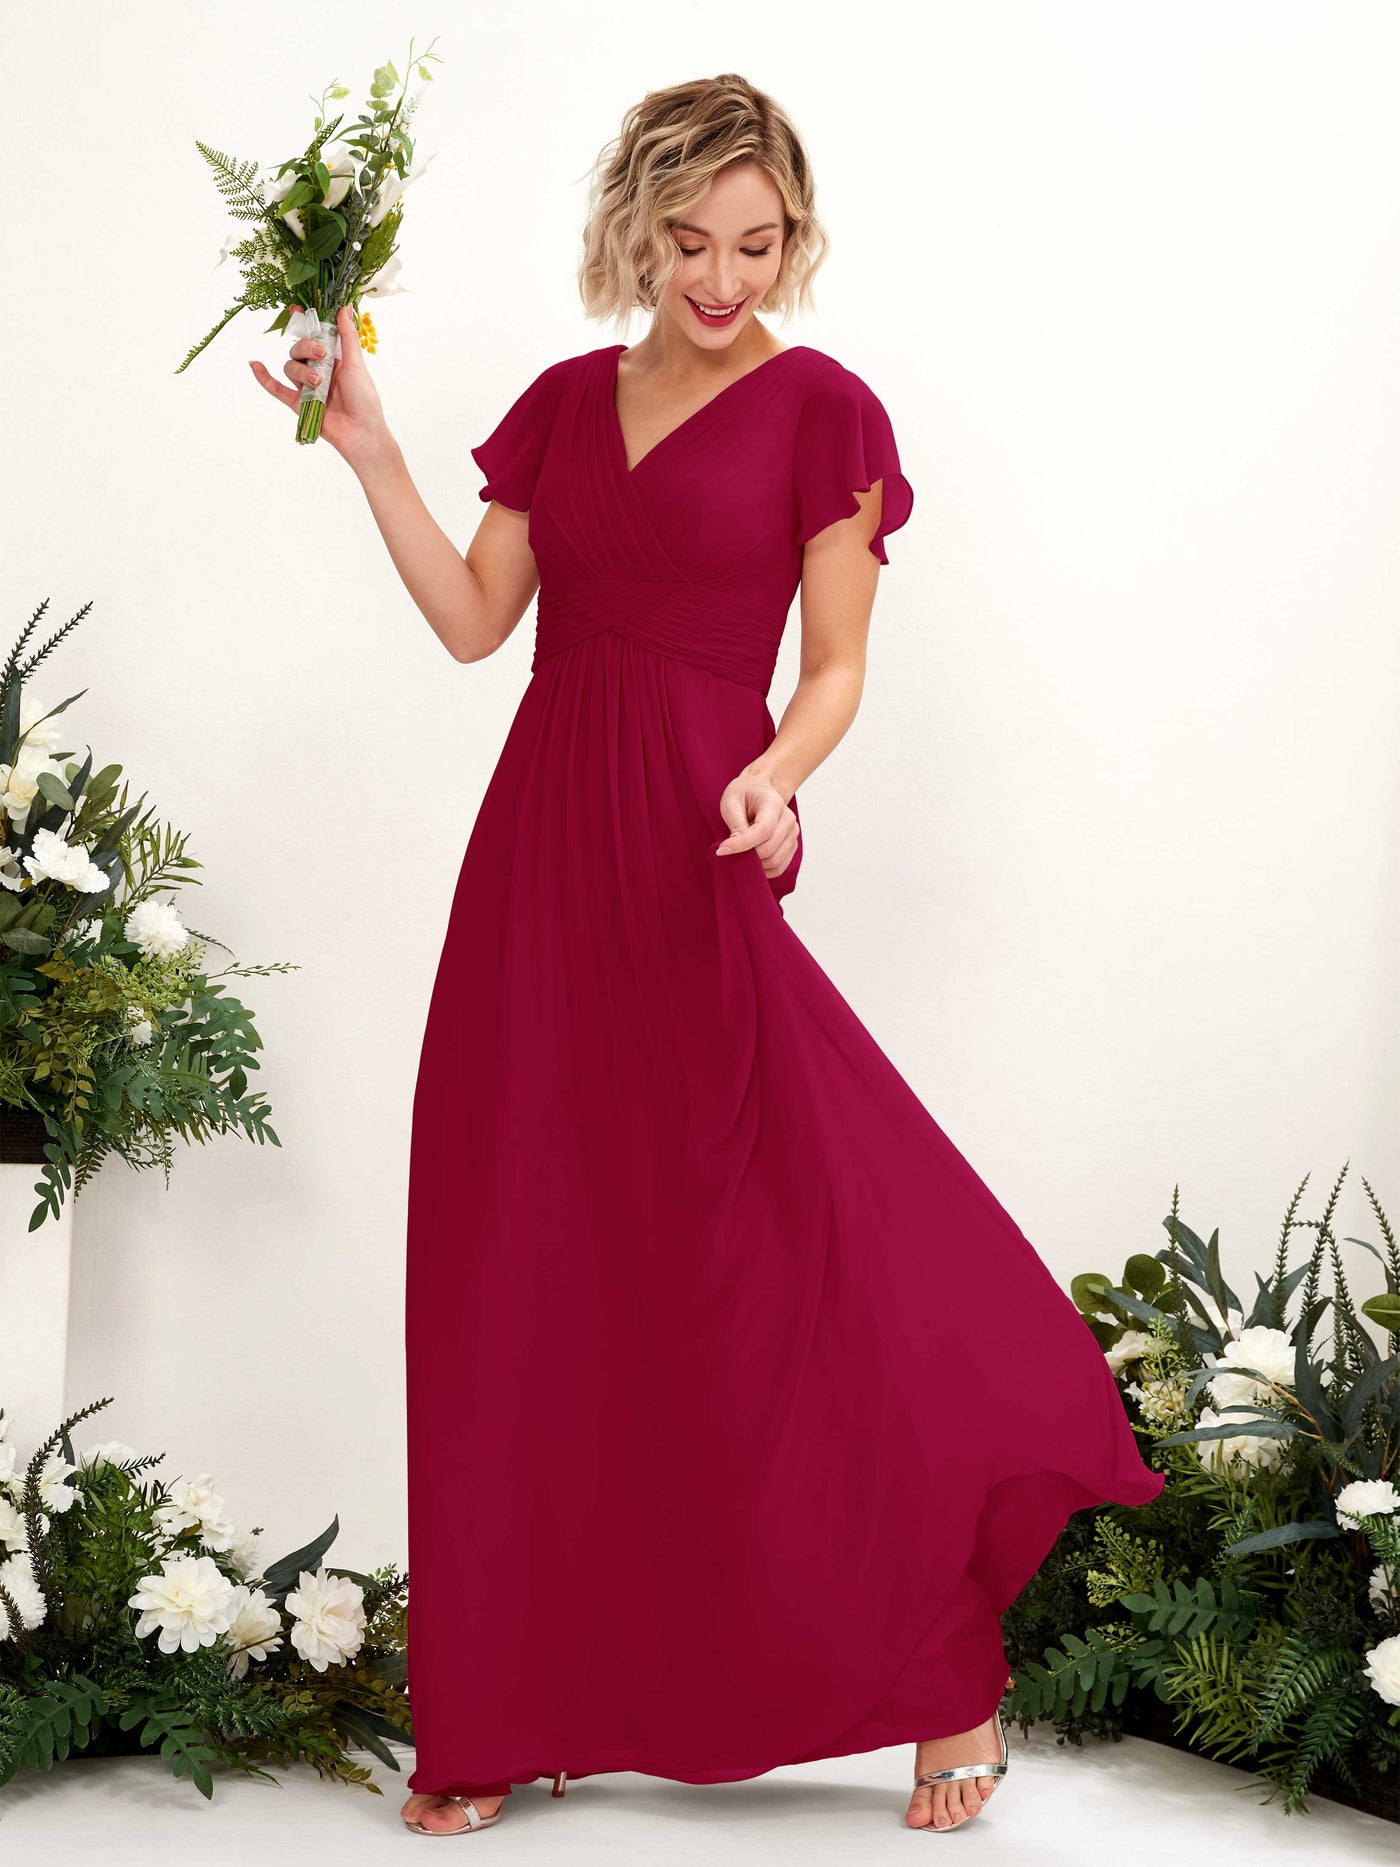 Jester Red Bridesmaid Dresses Bridesmaid Dress A-line Chiffon V-neck Full Length Short Sleeves Wedding Party Dress (81224341)#color_jester-red